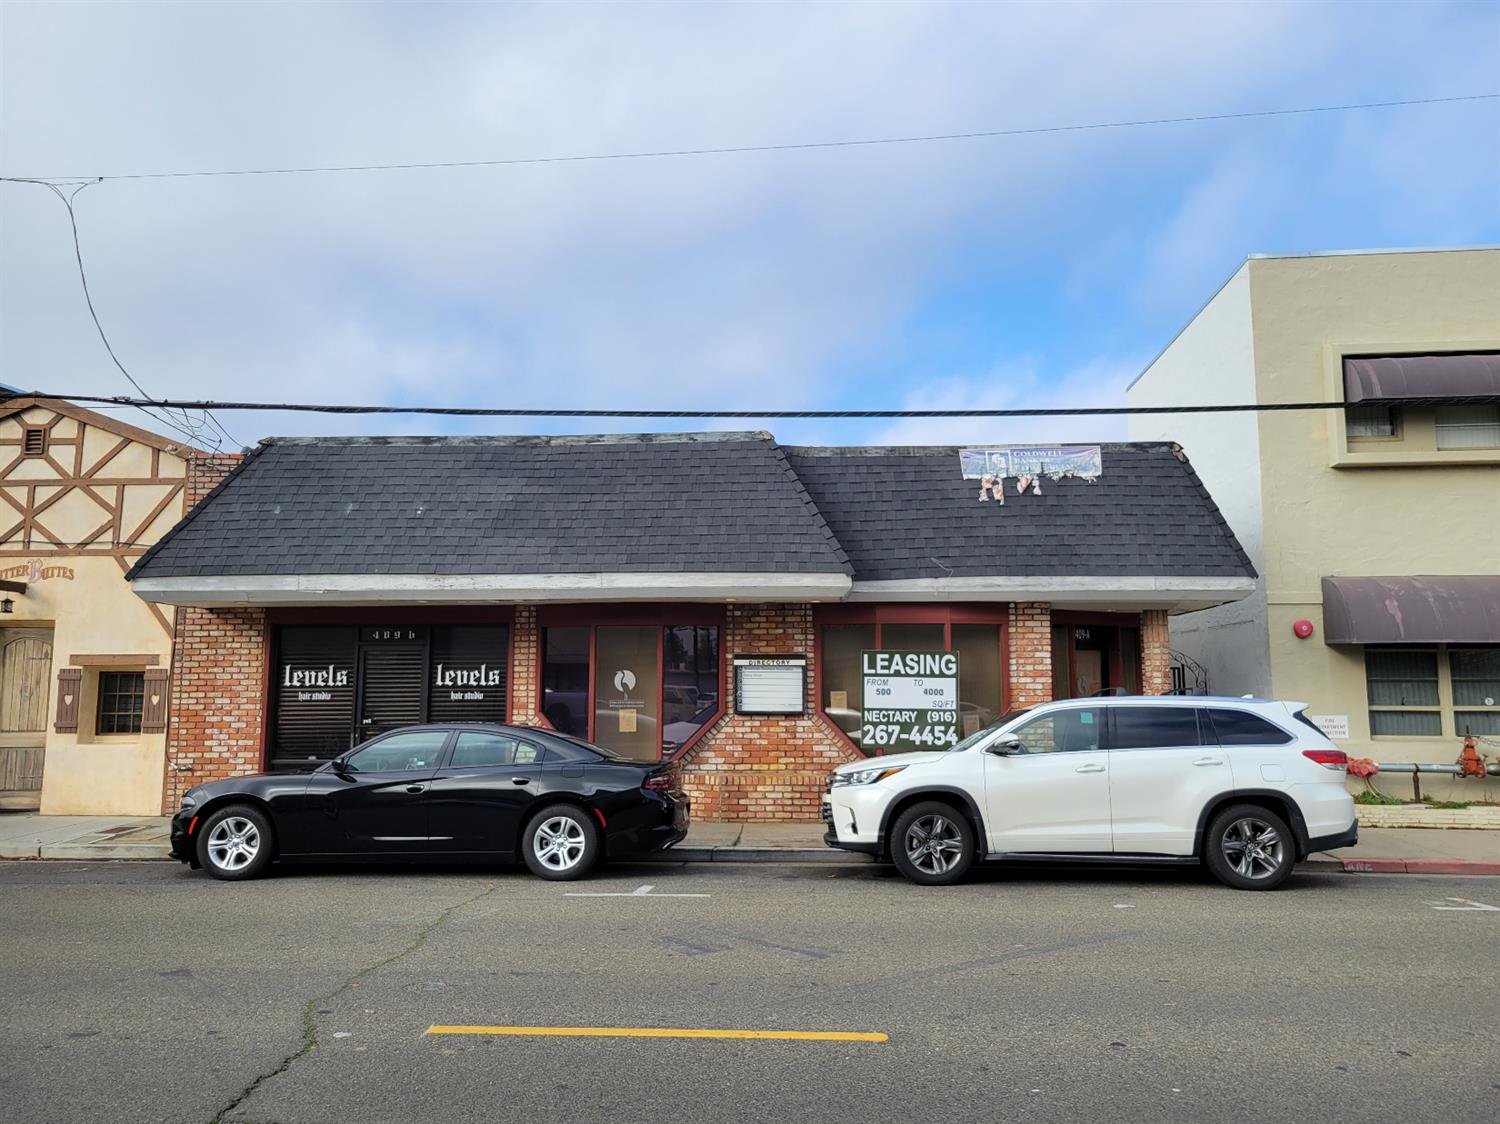 Office building located in a desirable area in downtown Yuba City.  There are 8 suites on two floors with a total of 4,732 SF.  Office space with private suites, break room, private restrooms, reception and waiting areas.  7 vacant suites and one suite on month to month lease.  Priced below market value at $180/SF.